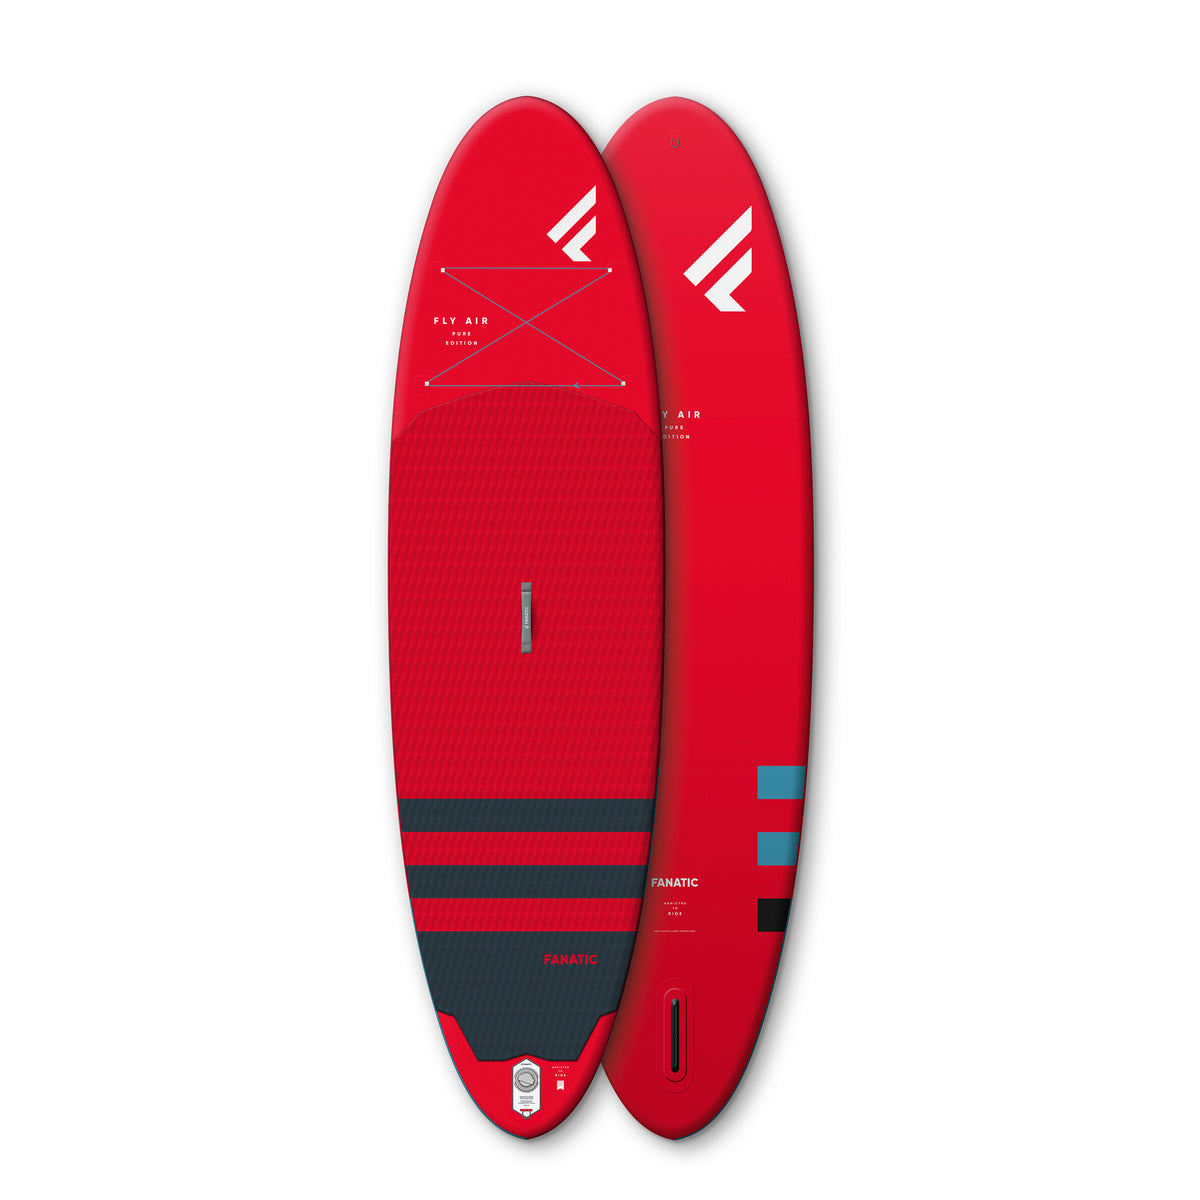 FANATIC FLY AIR 10'8" RED inflatable sup board